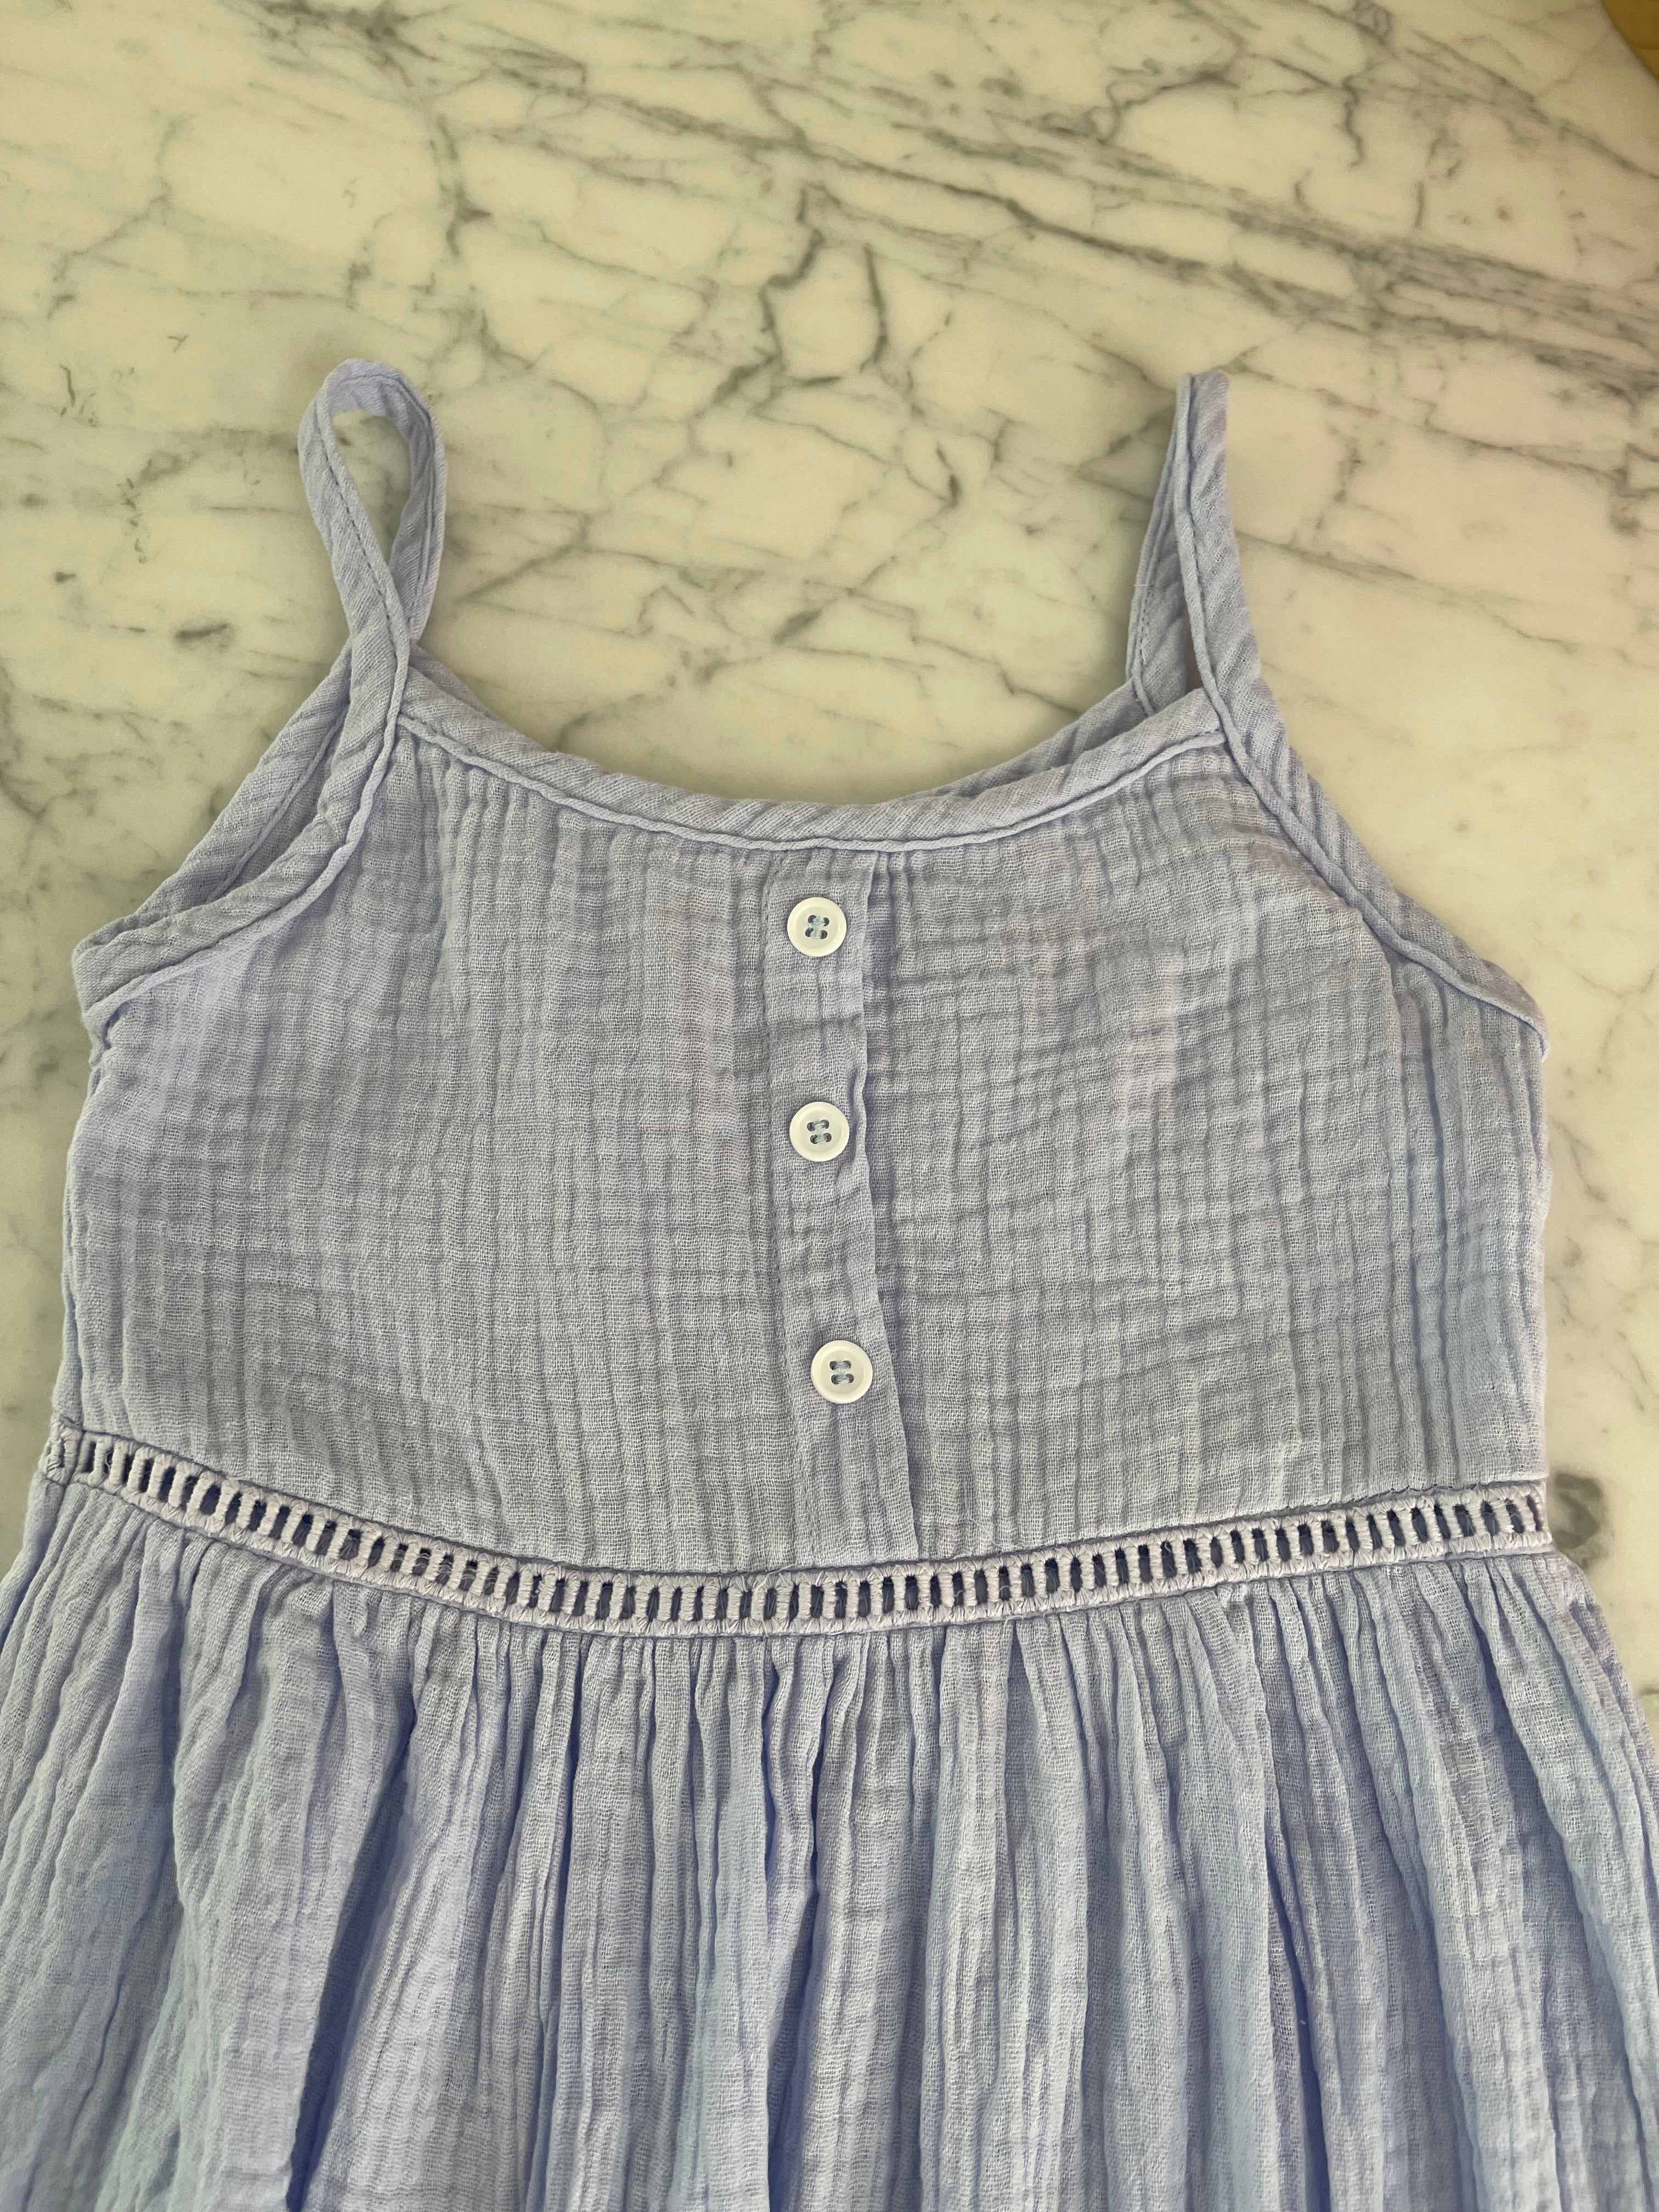 top-section-of-girls-blue-cotton-dress-lying-on-a-table